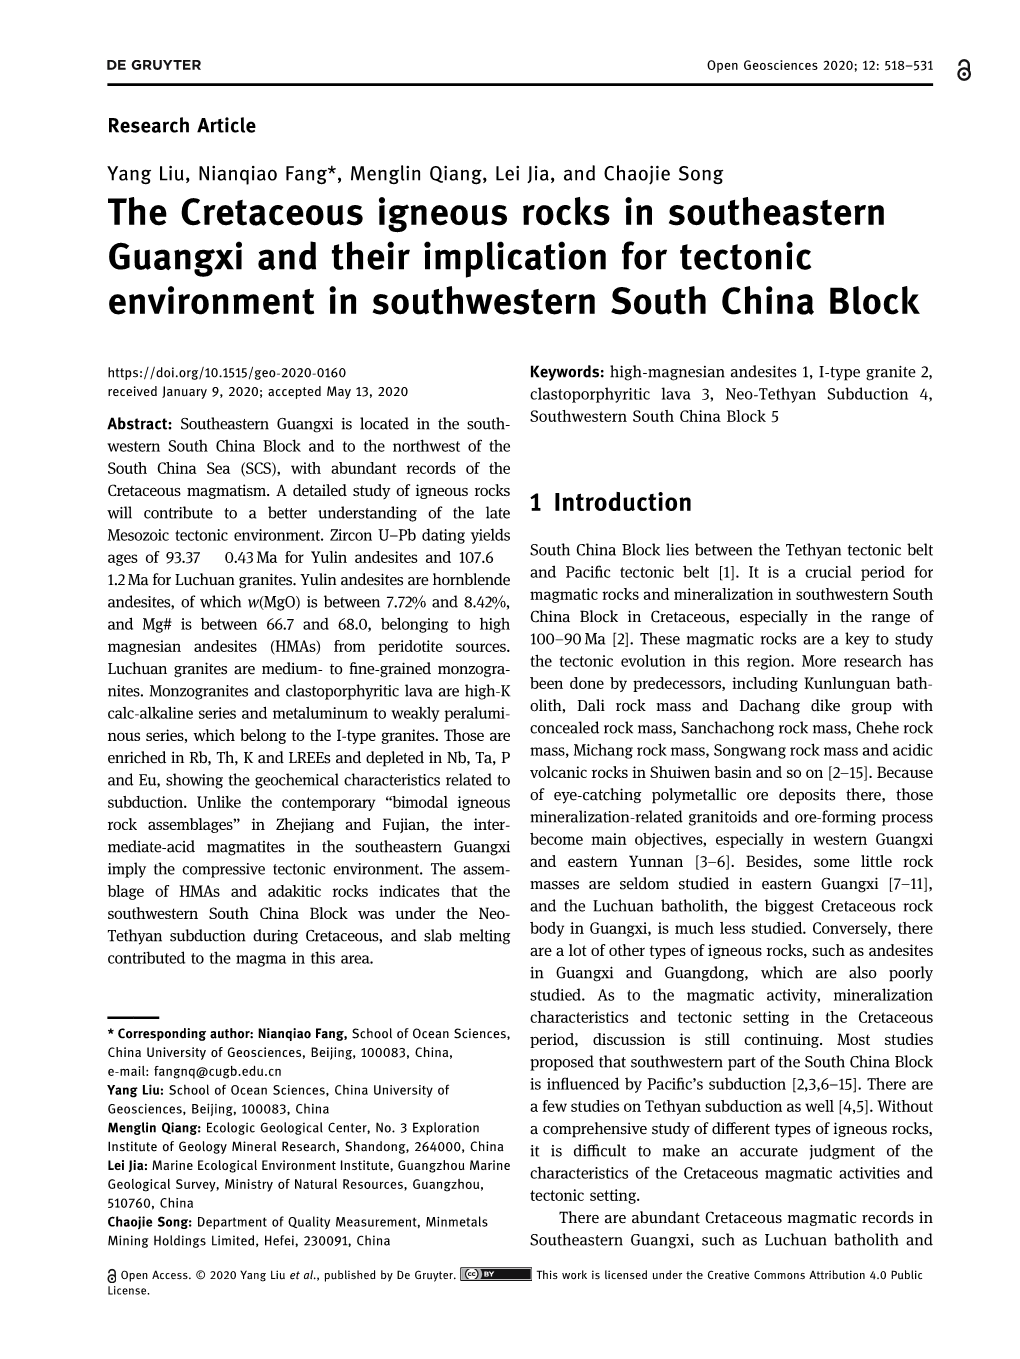 The Cretaceous Igneous Rocks in Southeastern Guangxi and Their Implication for Tectonic Environment in Southwestern South China Block